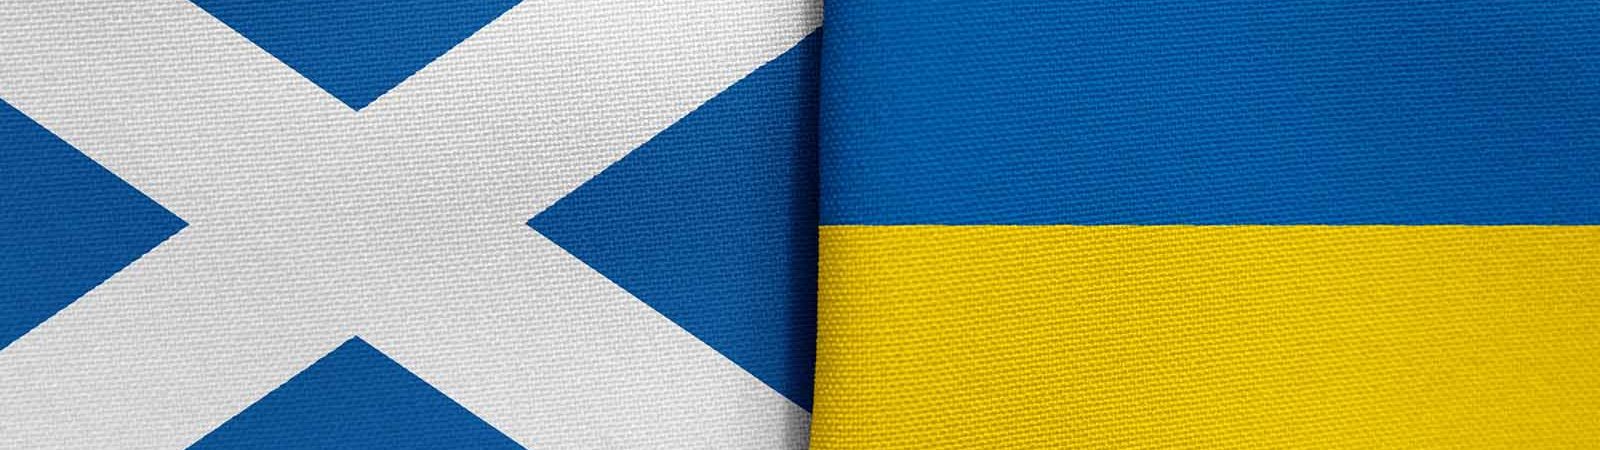 The Scottish and Ukrainian flags together